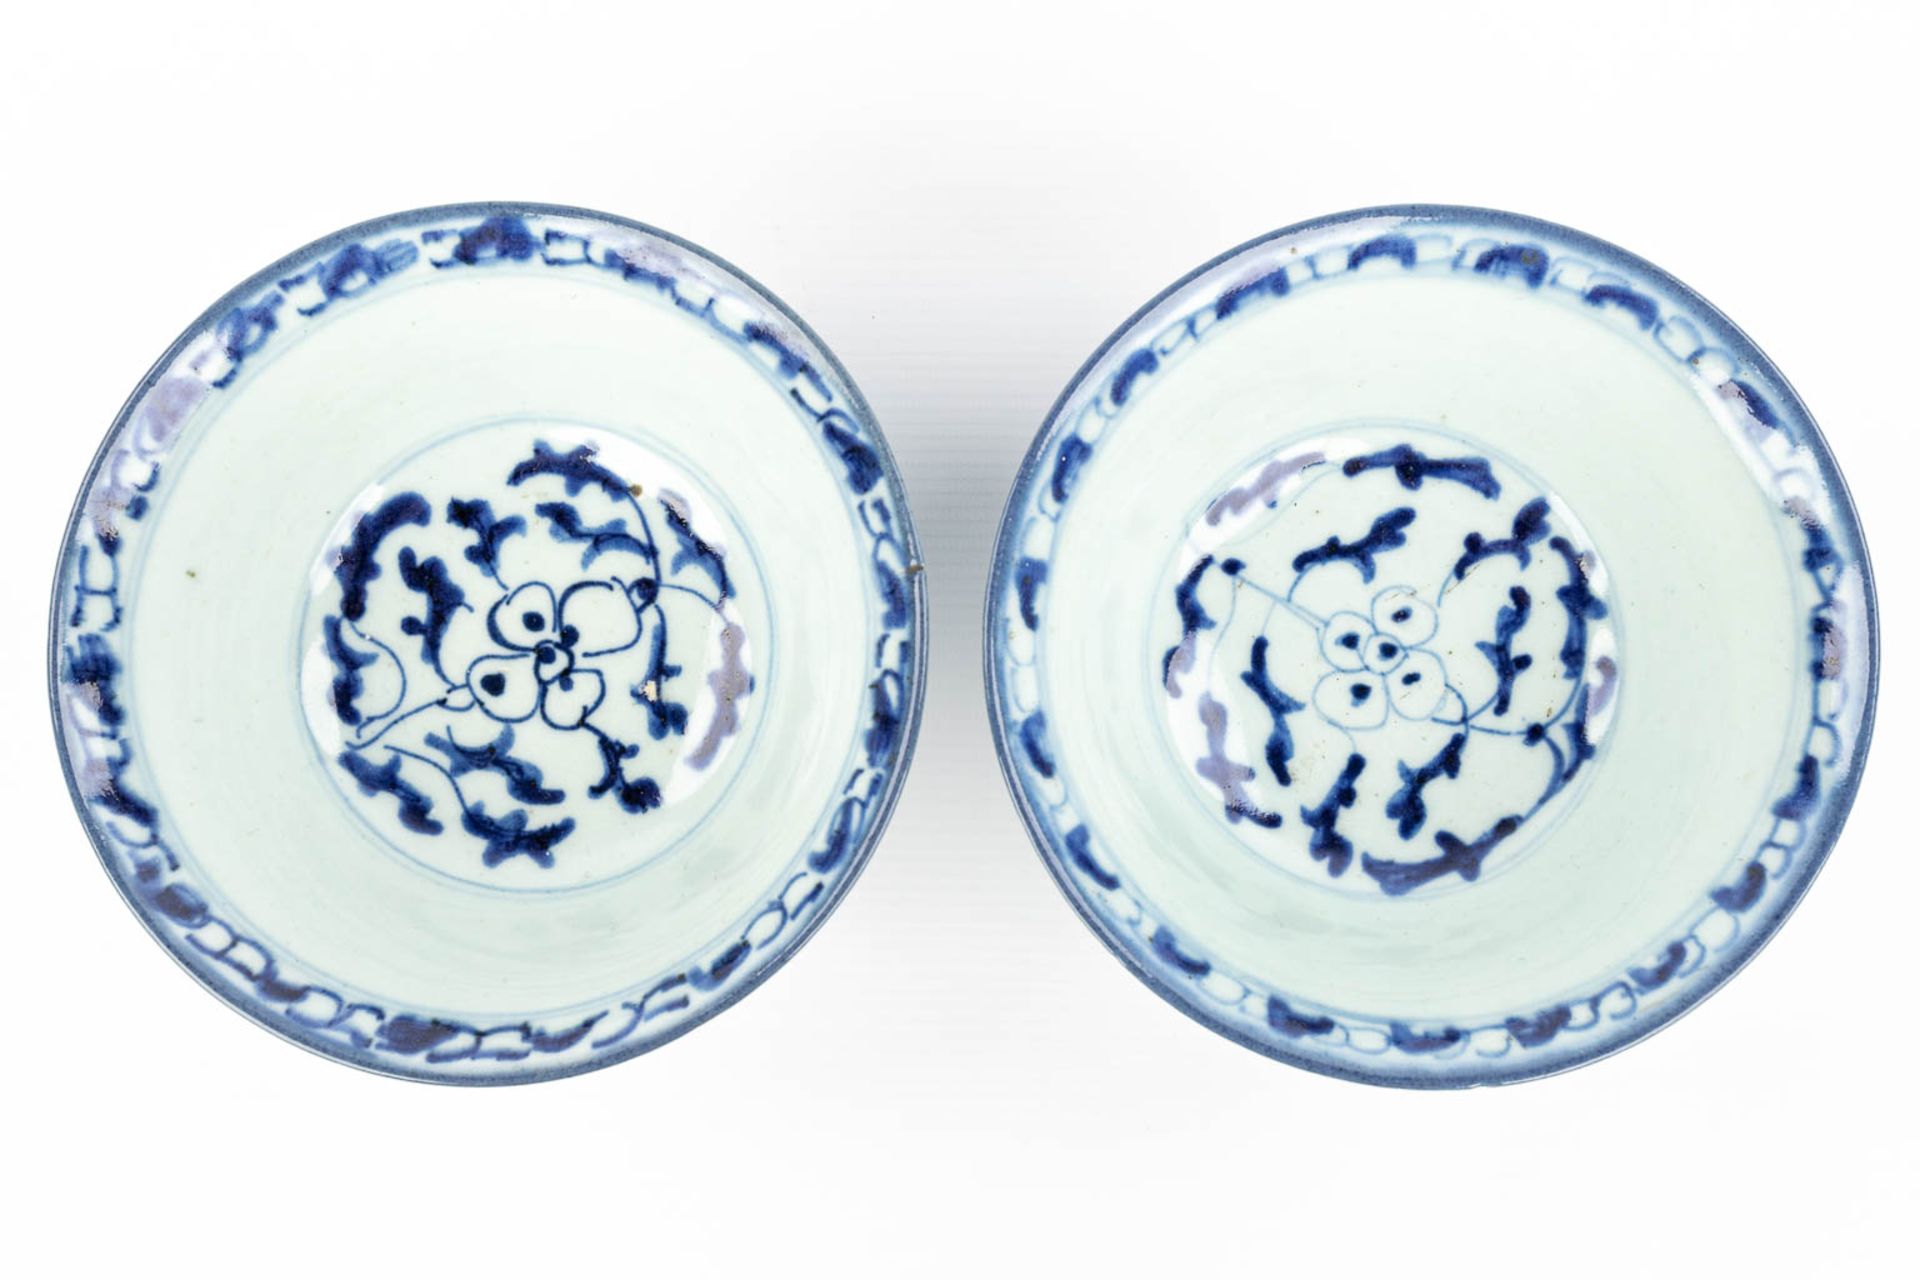 A pair of Chinese bowls made of porcelain with a blue-white decor. (H:7,2cm) - Image 9 of 13